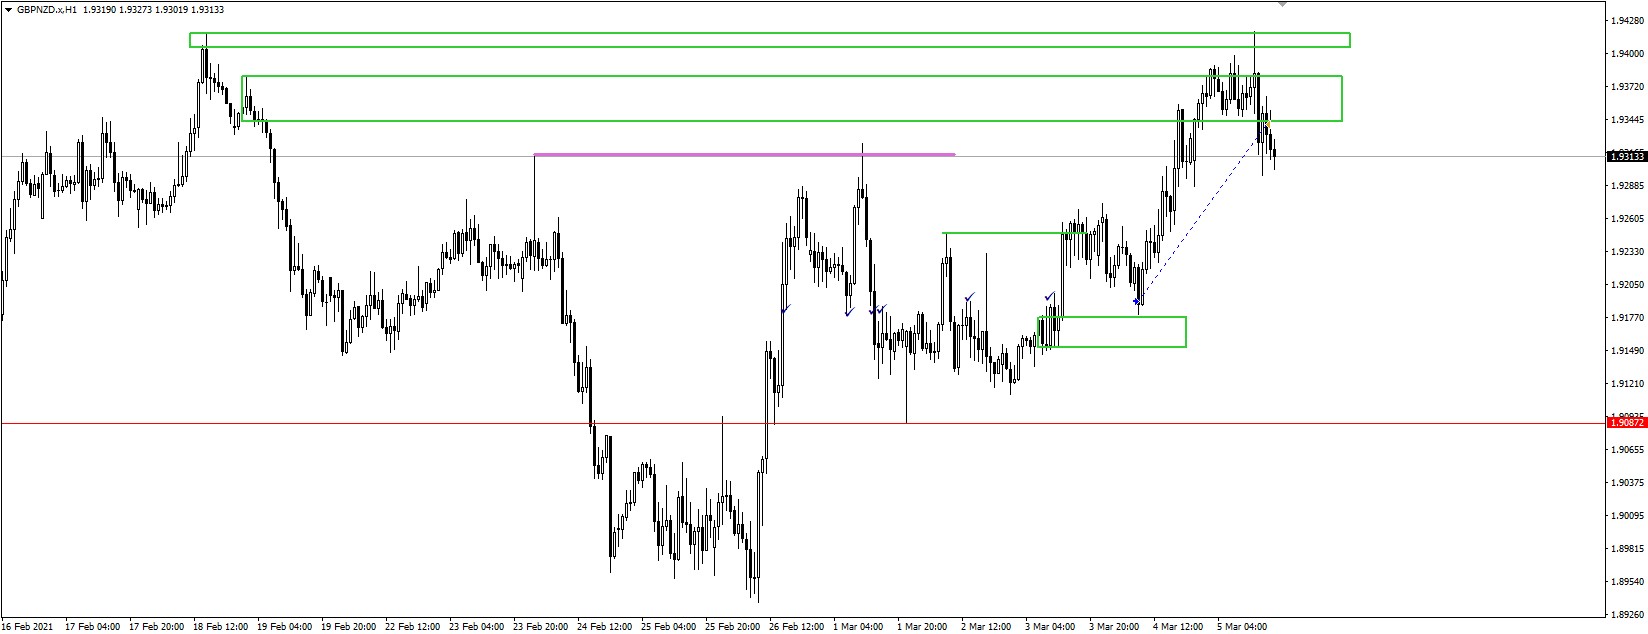 GBP/NZD H1 Price Action Supply Demand - forex trading ideas